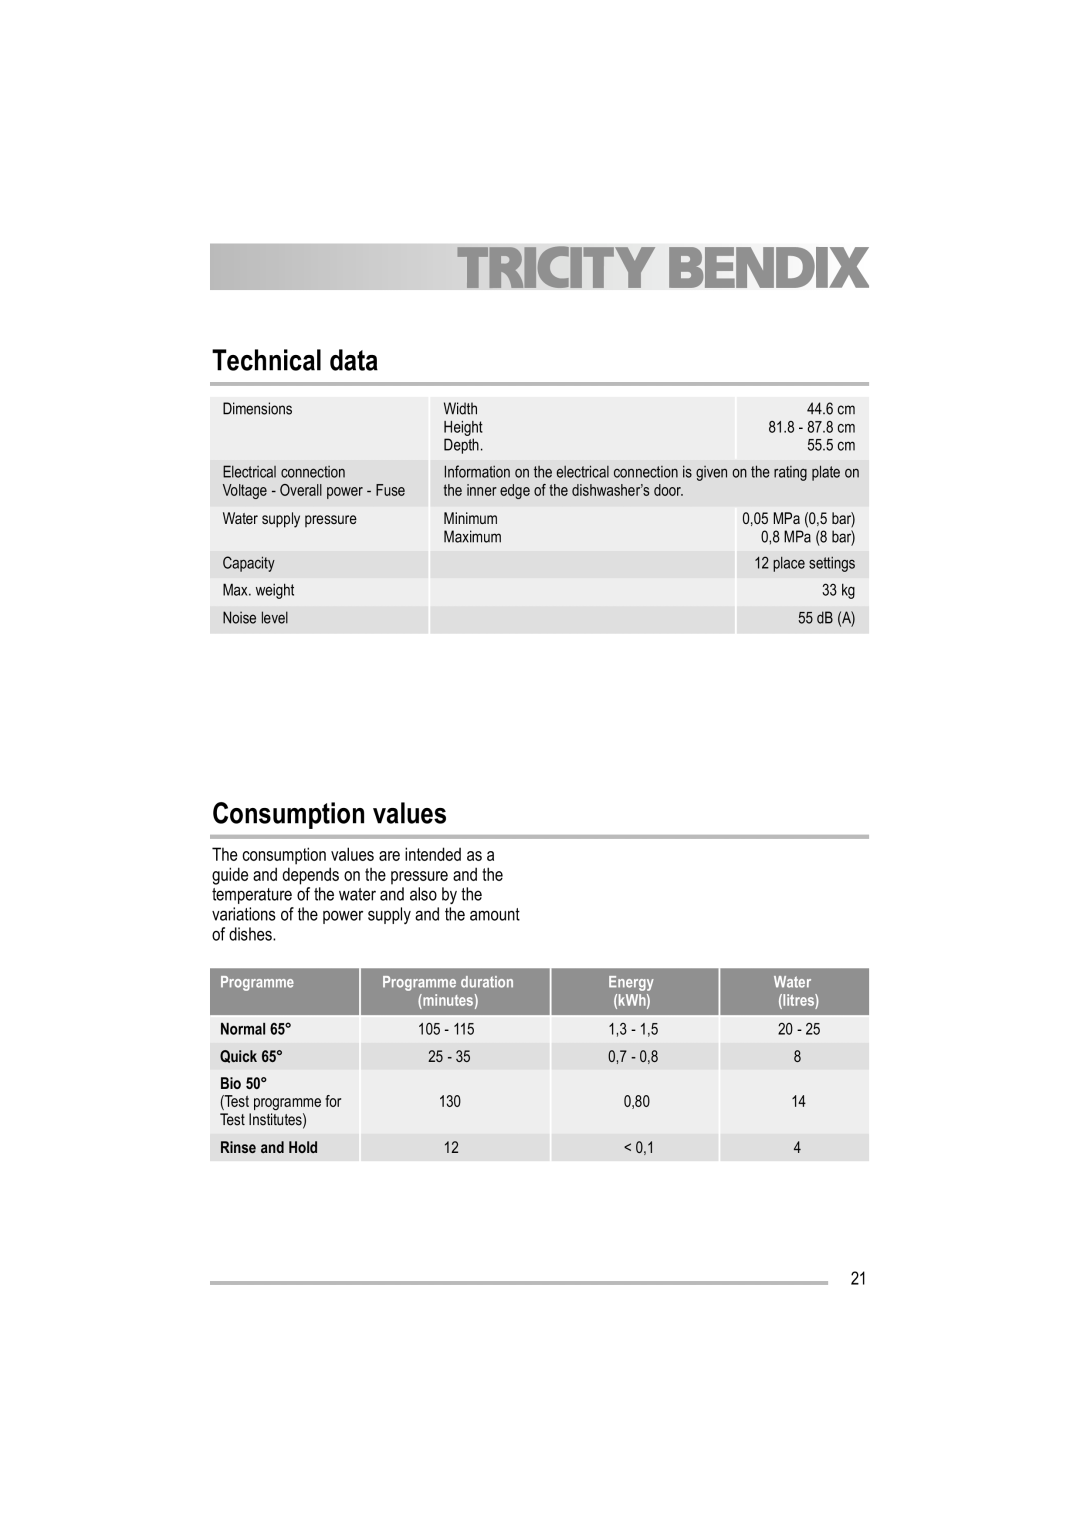 Tricity Bendix TBDW 32 manual Technical data, Consumption values, Programme, Energy, Normal, Quick, Rinse and Hold 